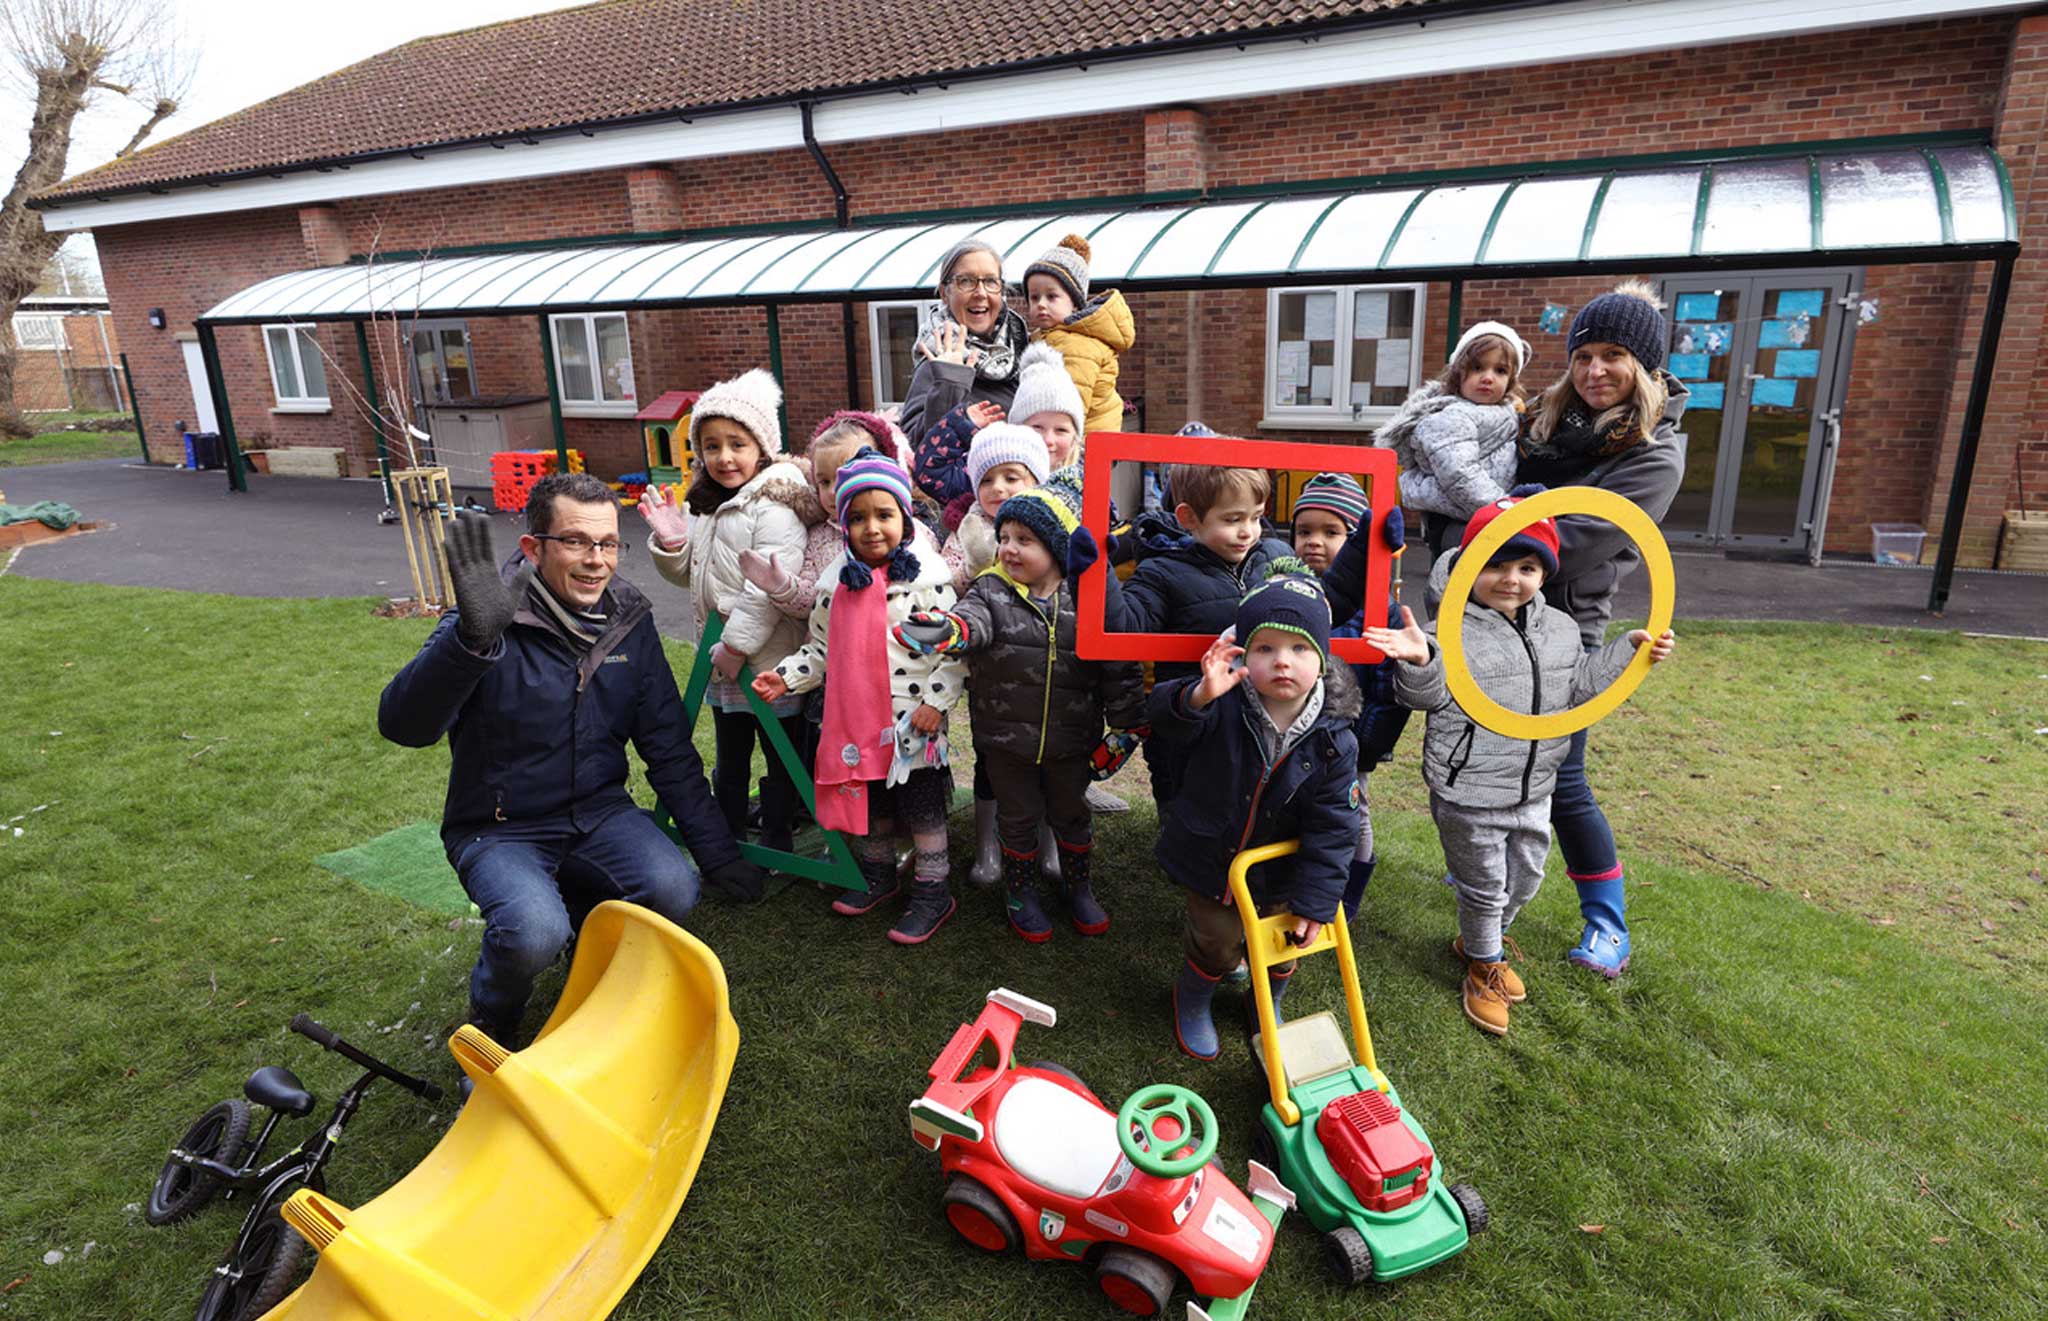 Featured image for “Playgroup moves into transformed building at Waterbeach Barracks”